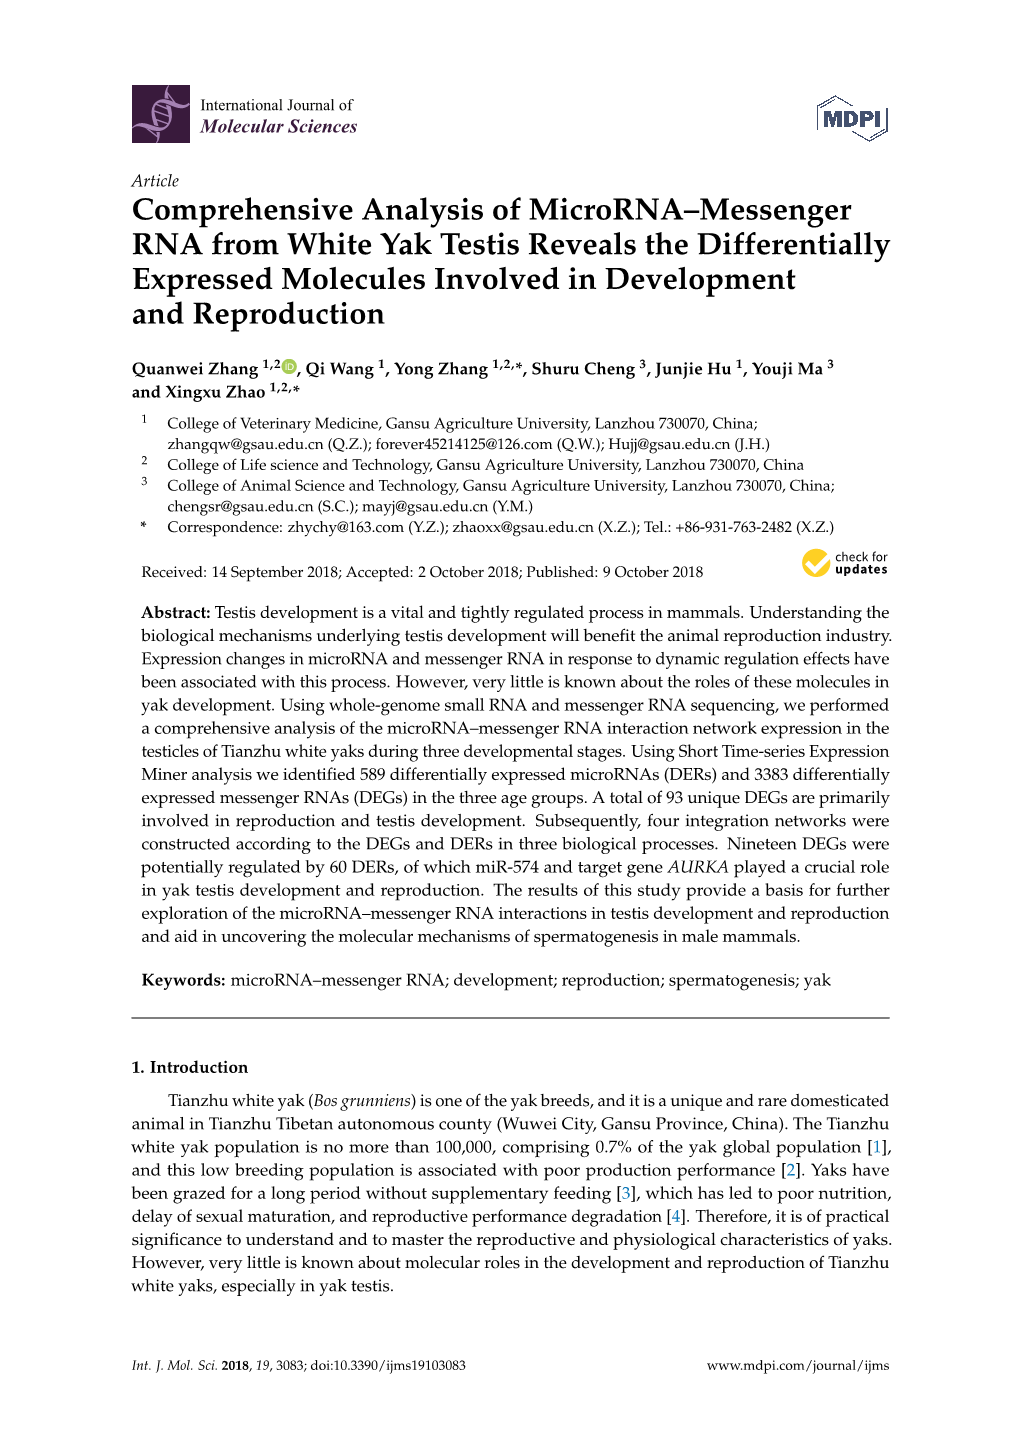 Comprehensive Analysis of Microrna–Messenger RNA from White Yak Testis Reveals the Differentially Expressed Molecules Involved in Development and Reproduction